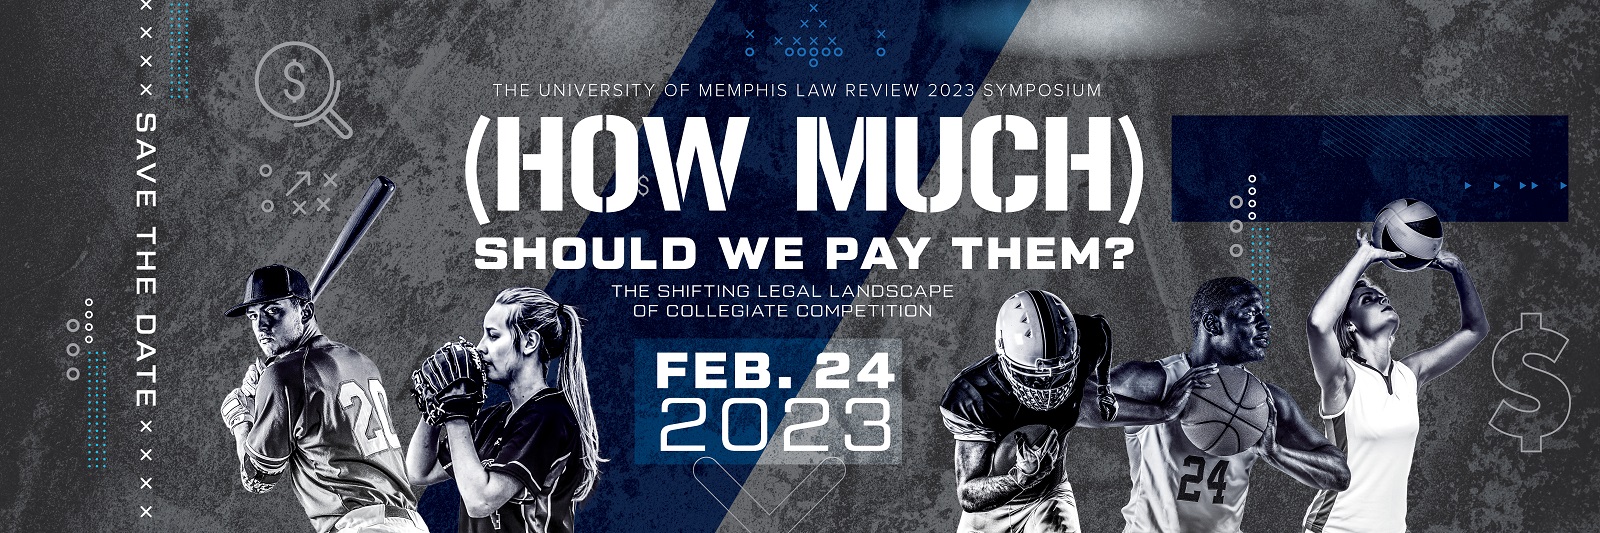 2023 law review symposium header